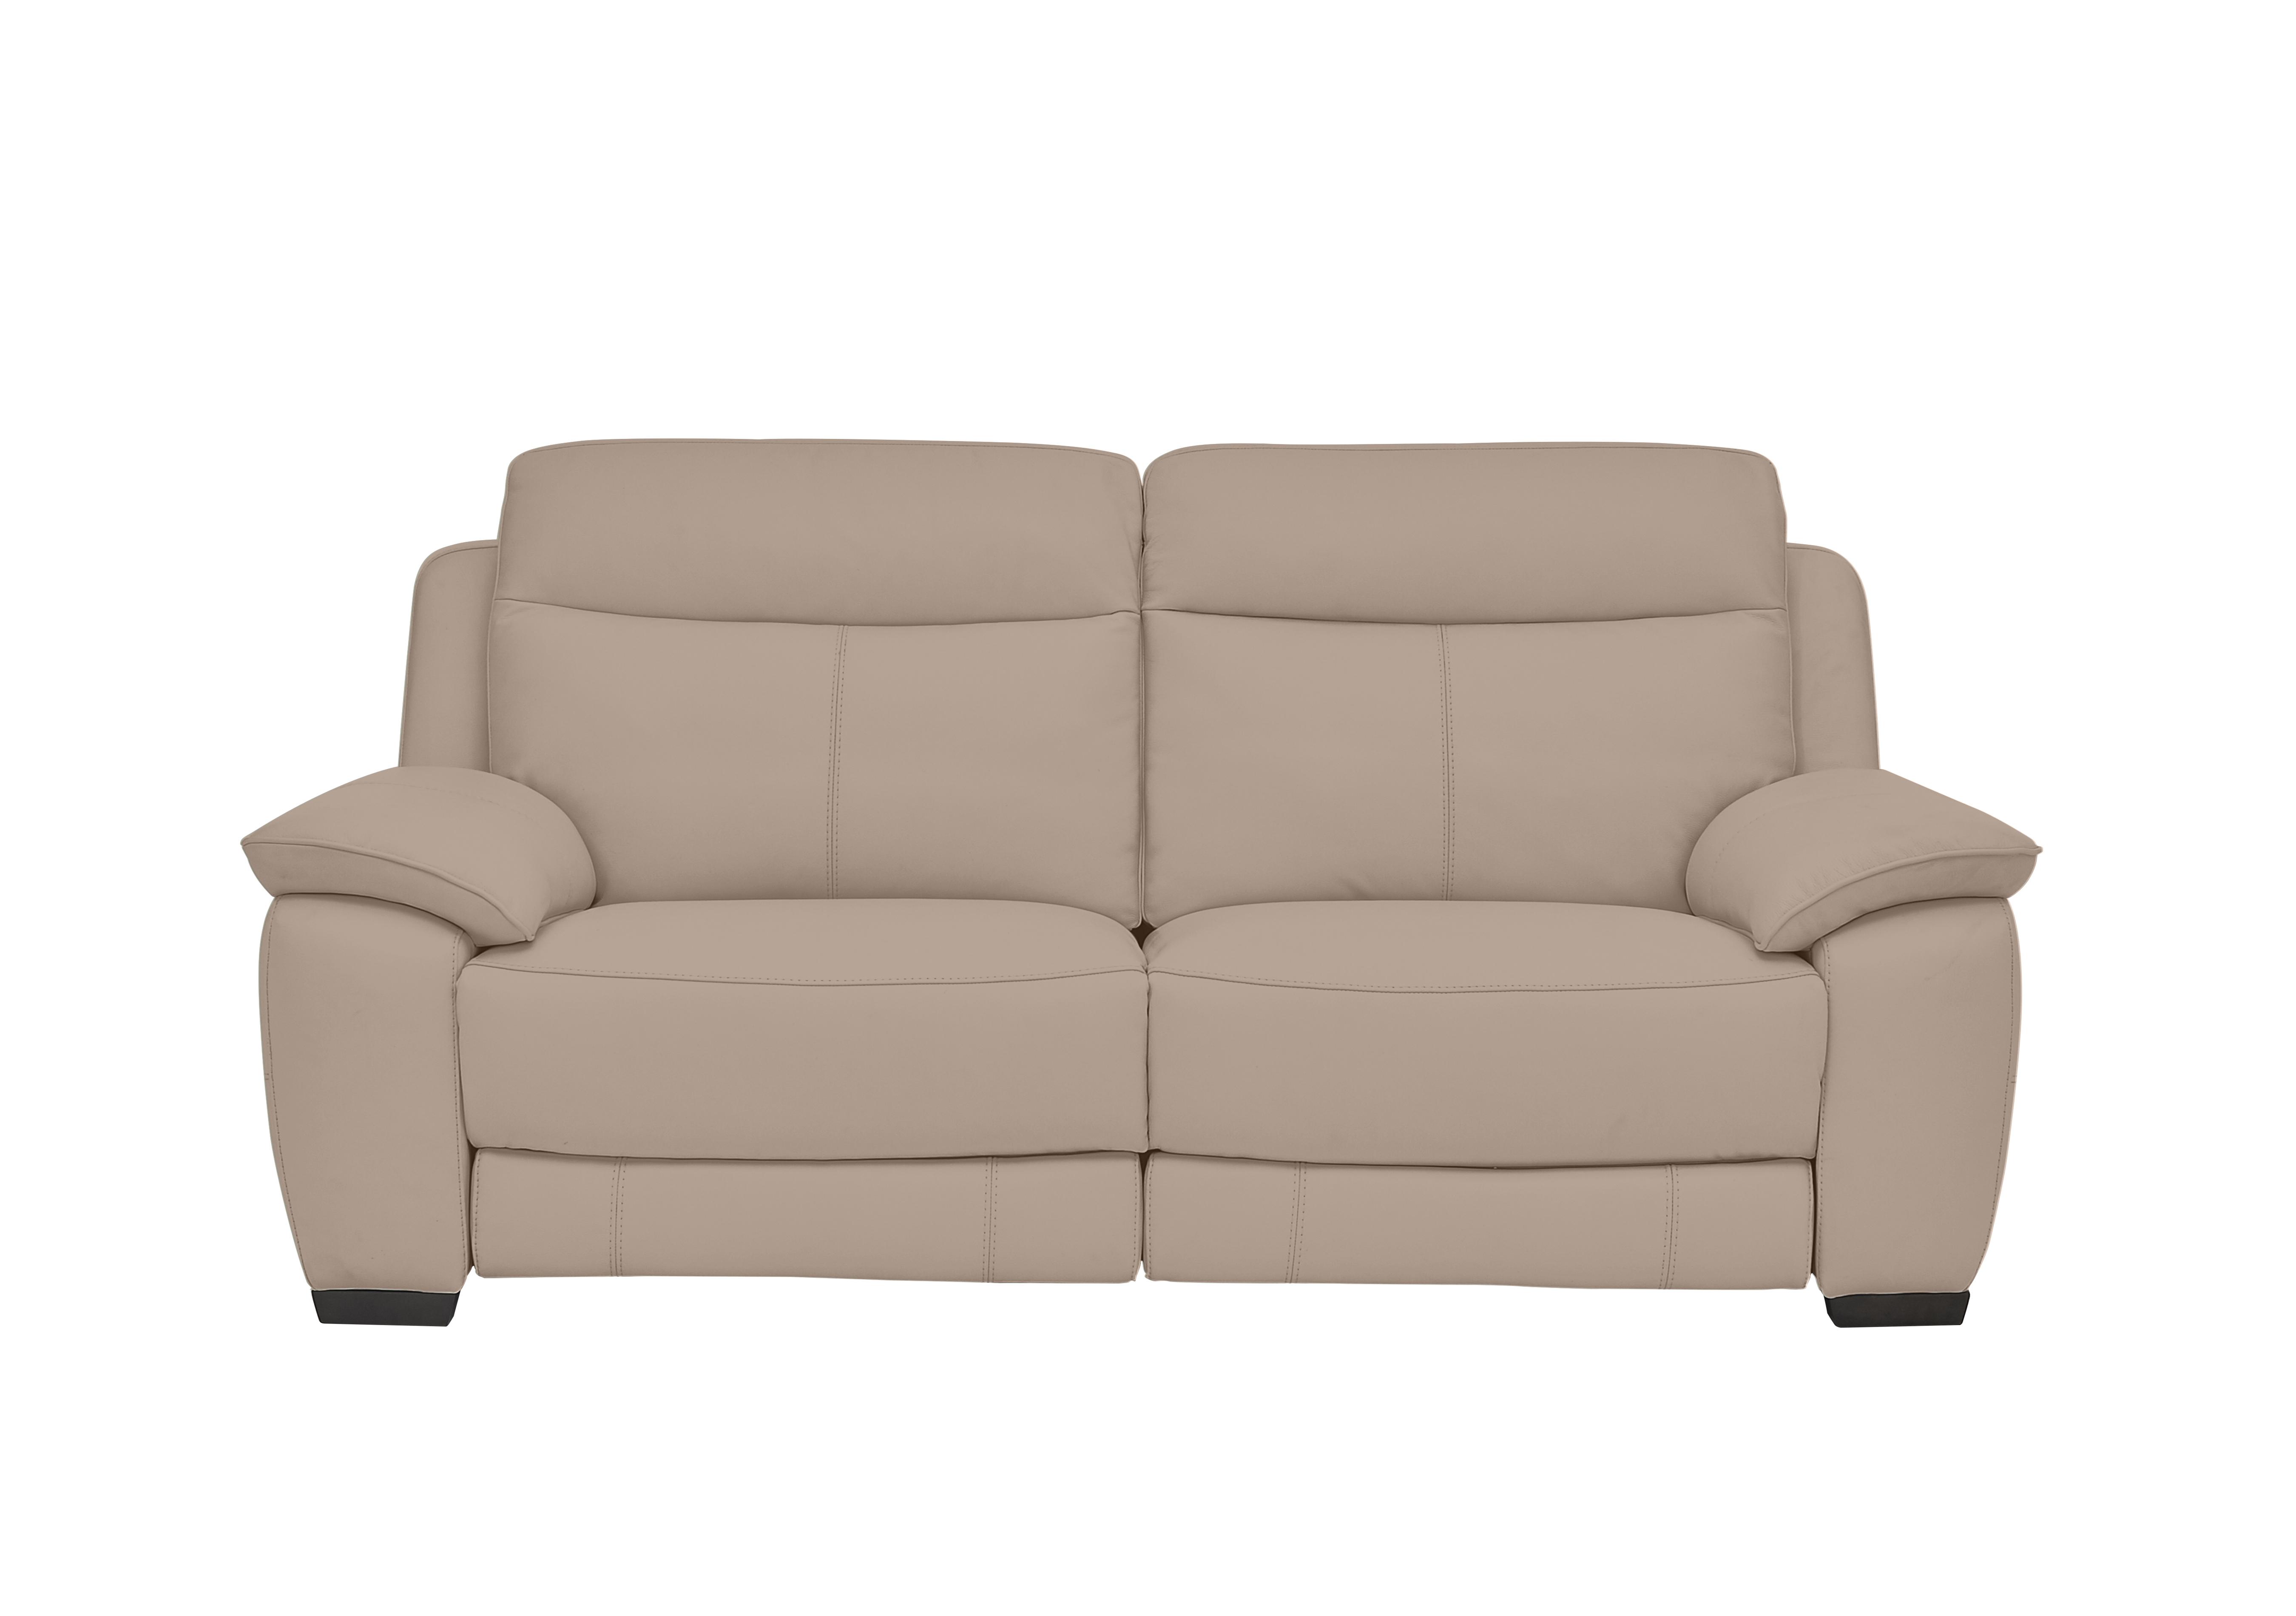 Starlight Express 3 Seater Leather Recliner Sofa with Power Headrests in Bv-039c Pebble on Furniture Village